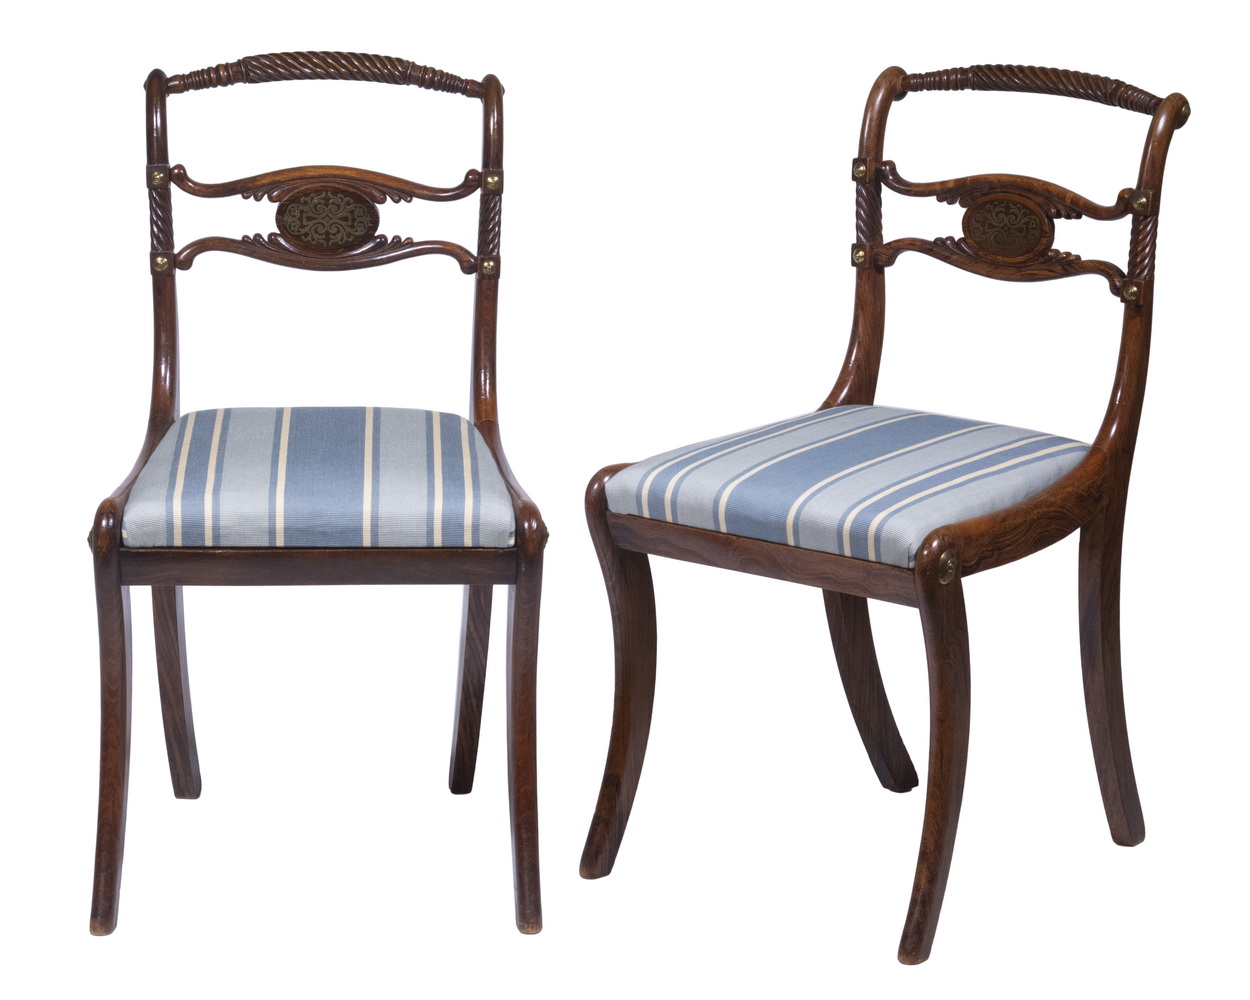 PAIR OF EMPIRE PERIOD PARLOR CHAIRS 3b65ca